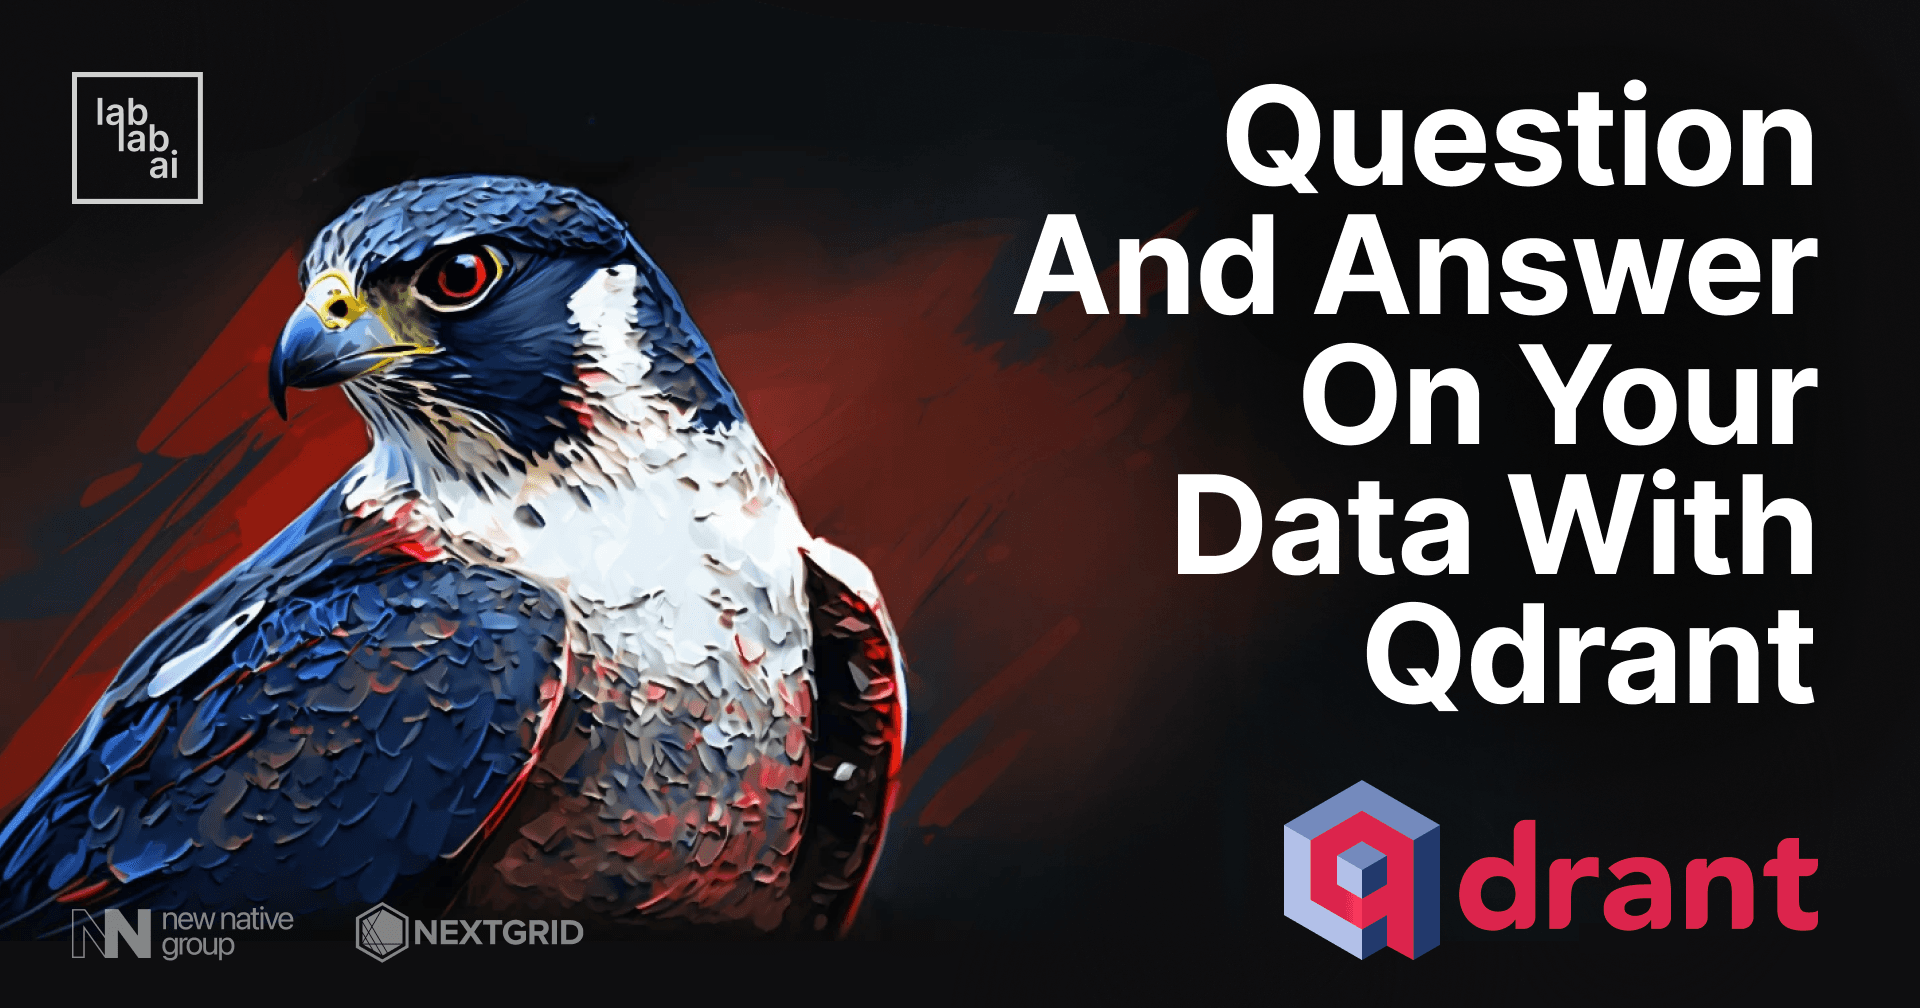 Question and Answer on your data with Qdrant